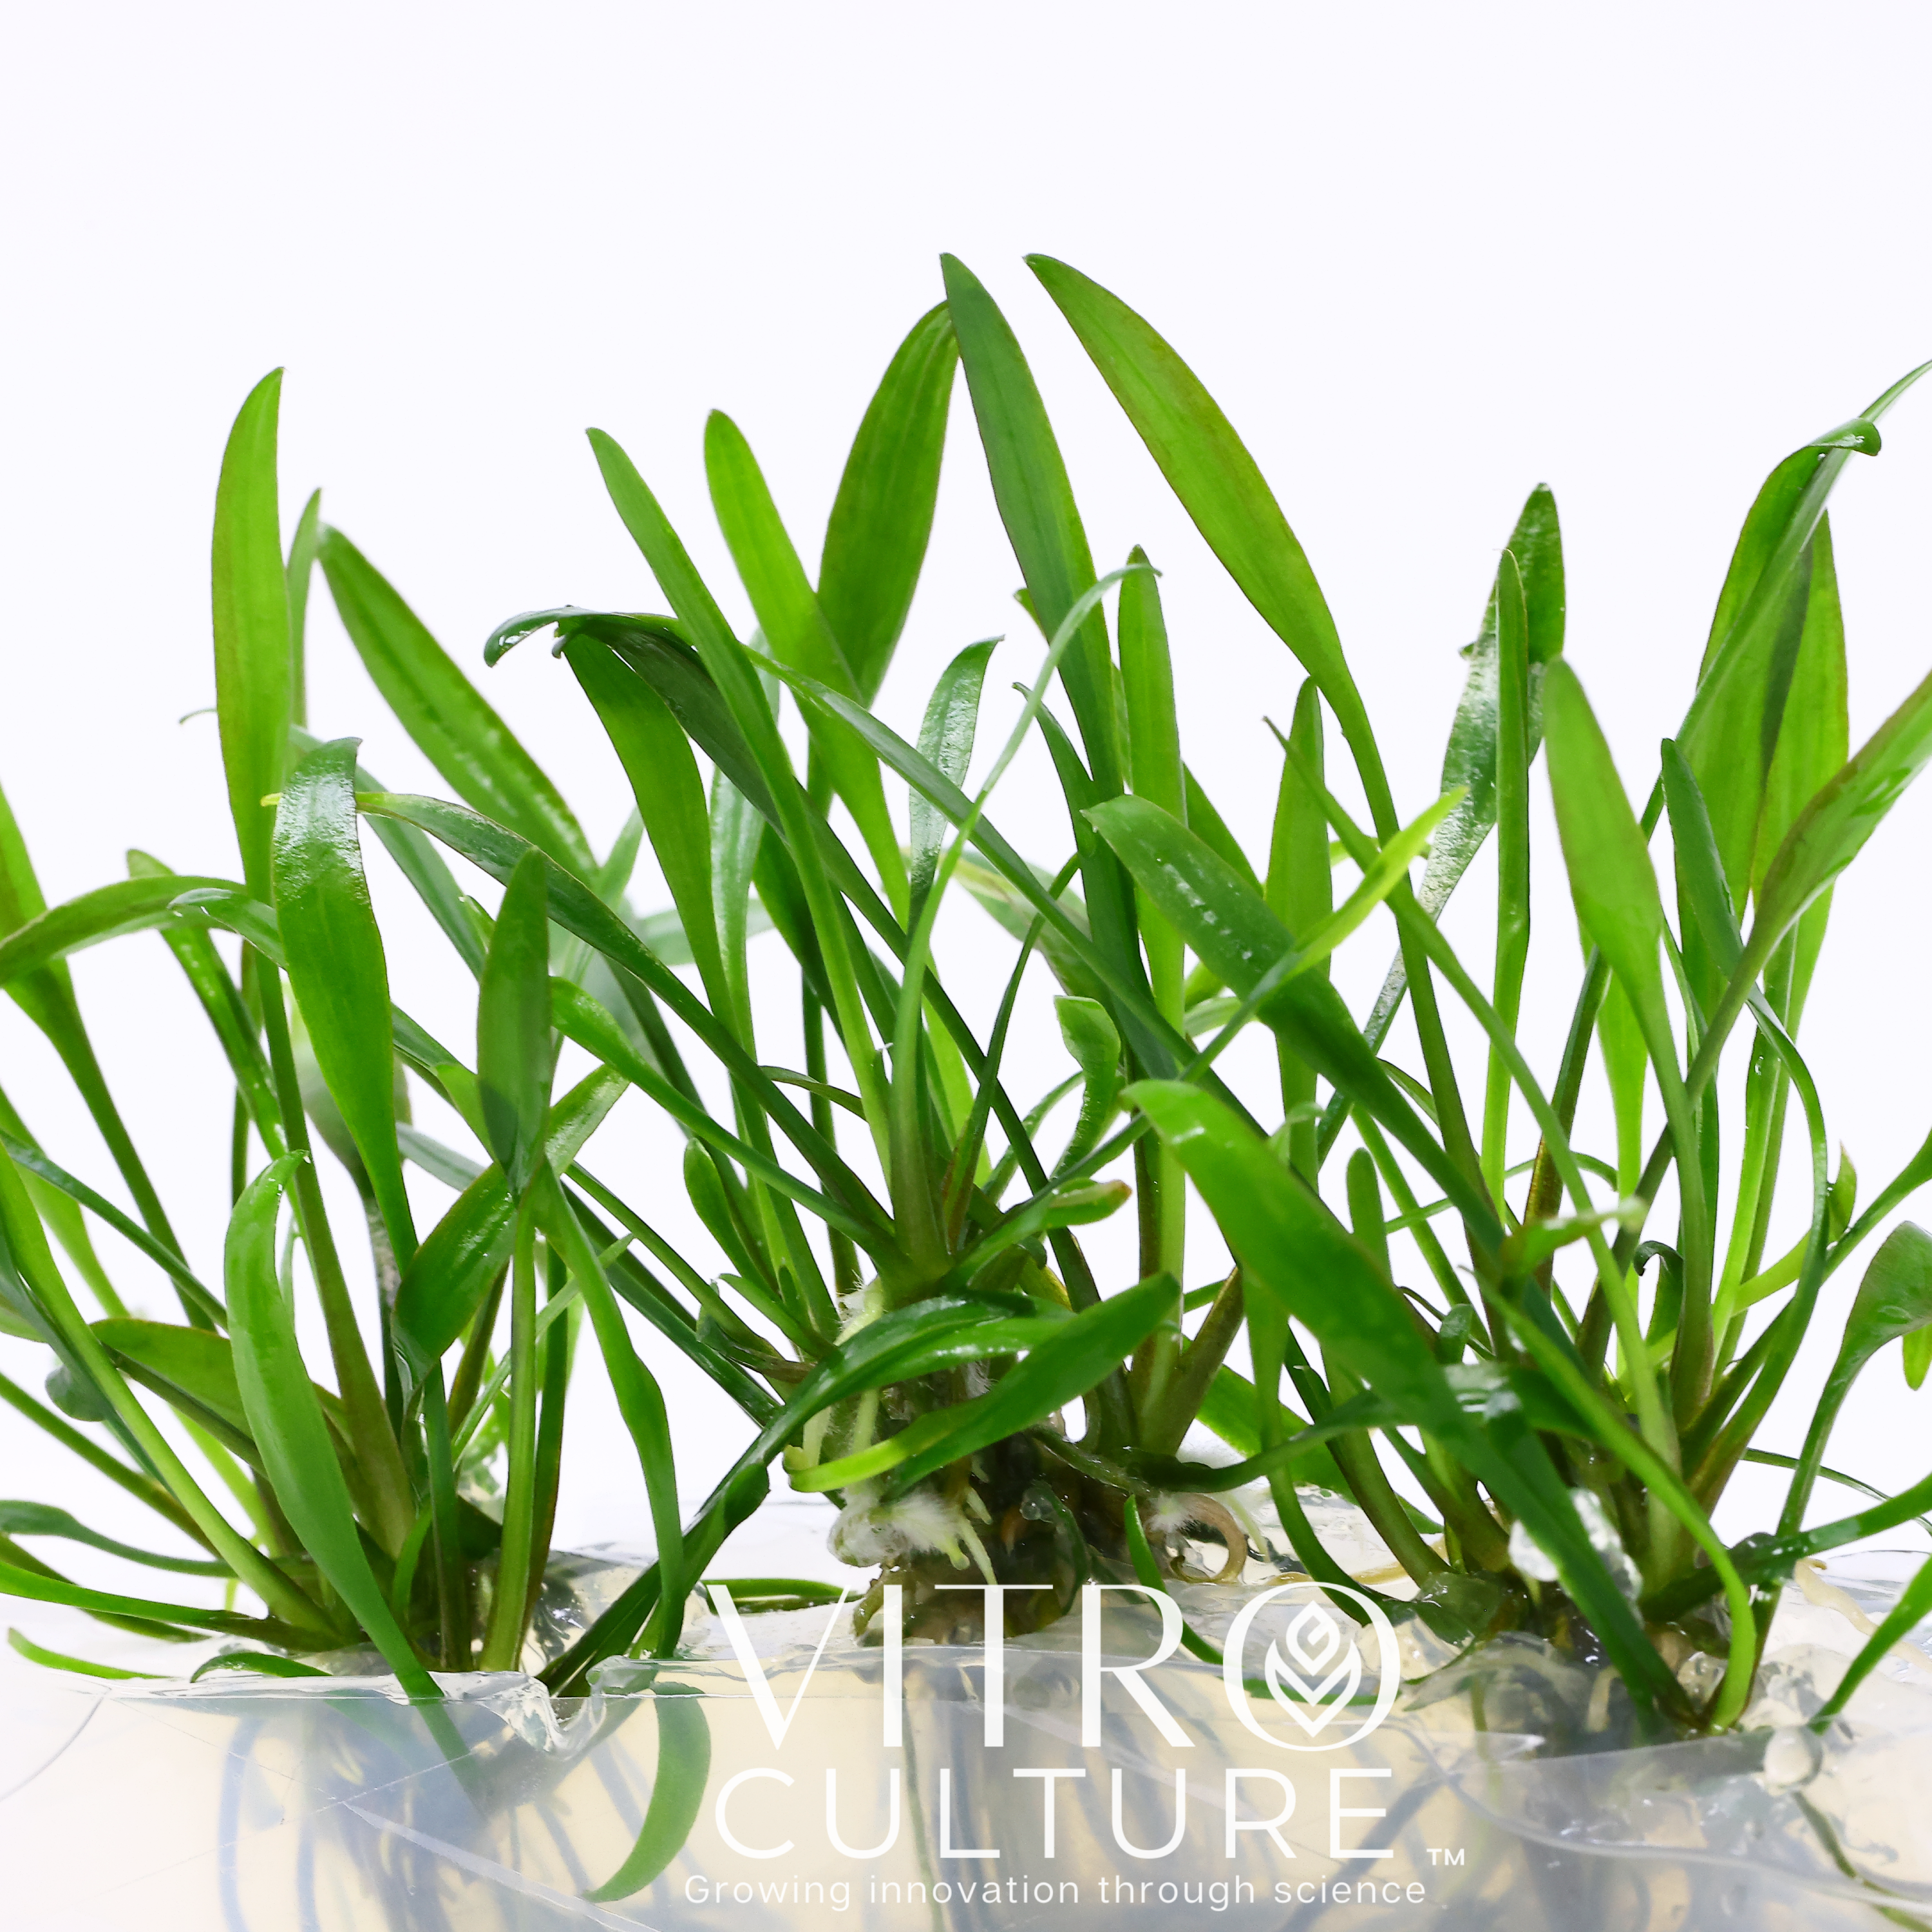 Looking for a beautiful and low-maintenance aquatic plant to enhance your freshwater aquarium? Look no further than Cryptocoryne Lucens Vitro Culture. This tissue-cultured plant is grown in a nutrient-rich medium under controlled conditions to ensure optimal health and vitality.